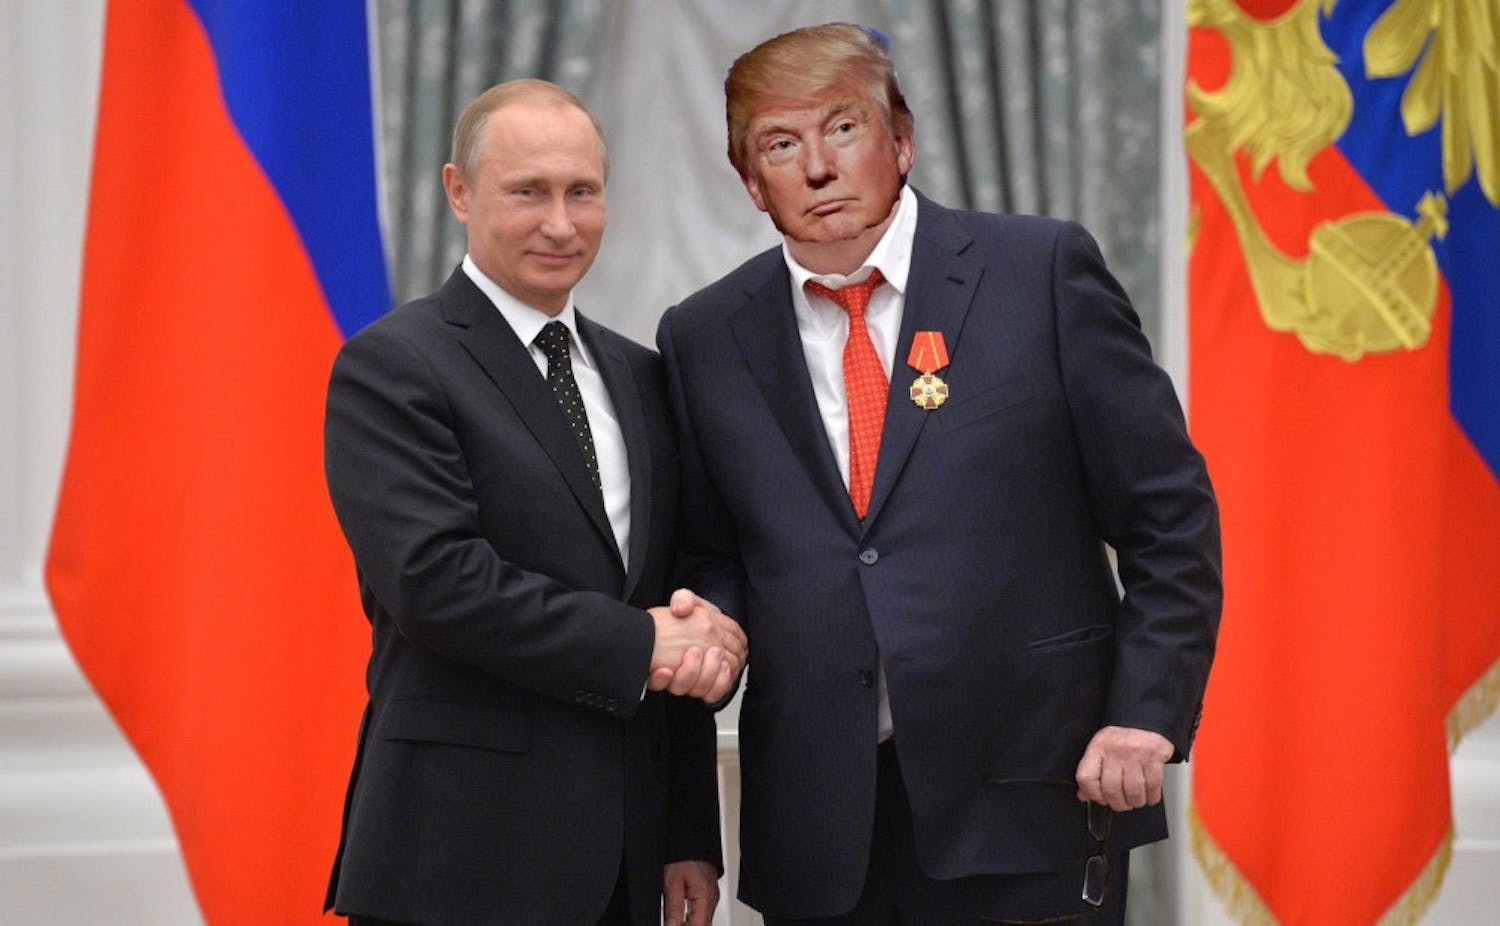 Putin awarding comrade Donald Trump the highly coveted Russian award for “Best Golden Shower.”